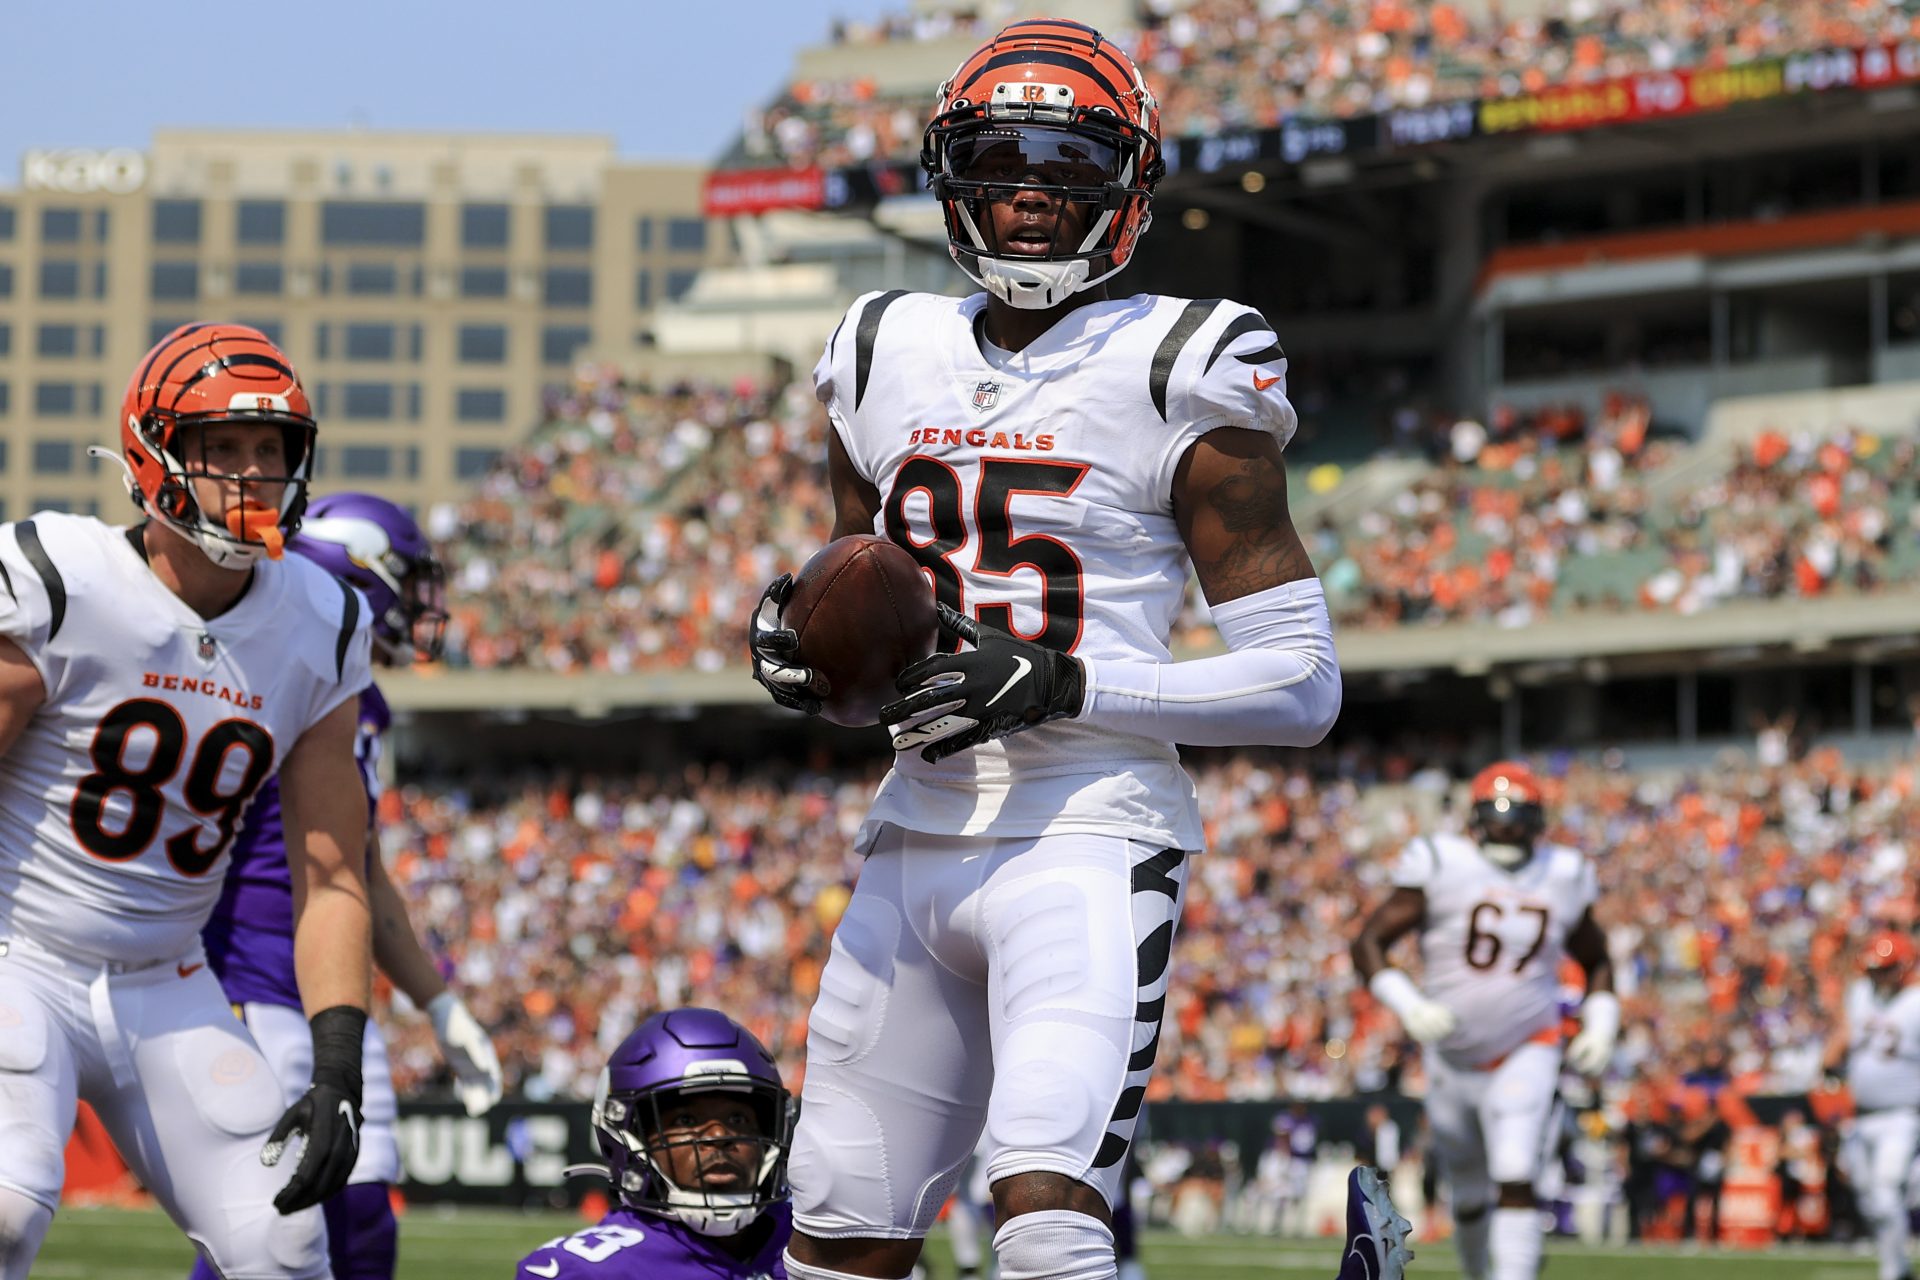 Tee Higgins to Swap Bengals’ Jersey Number to 5 from Chad Johnson’s No. 85